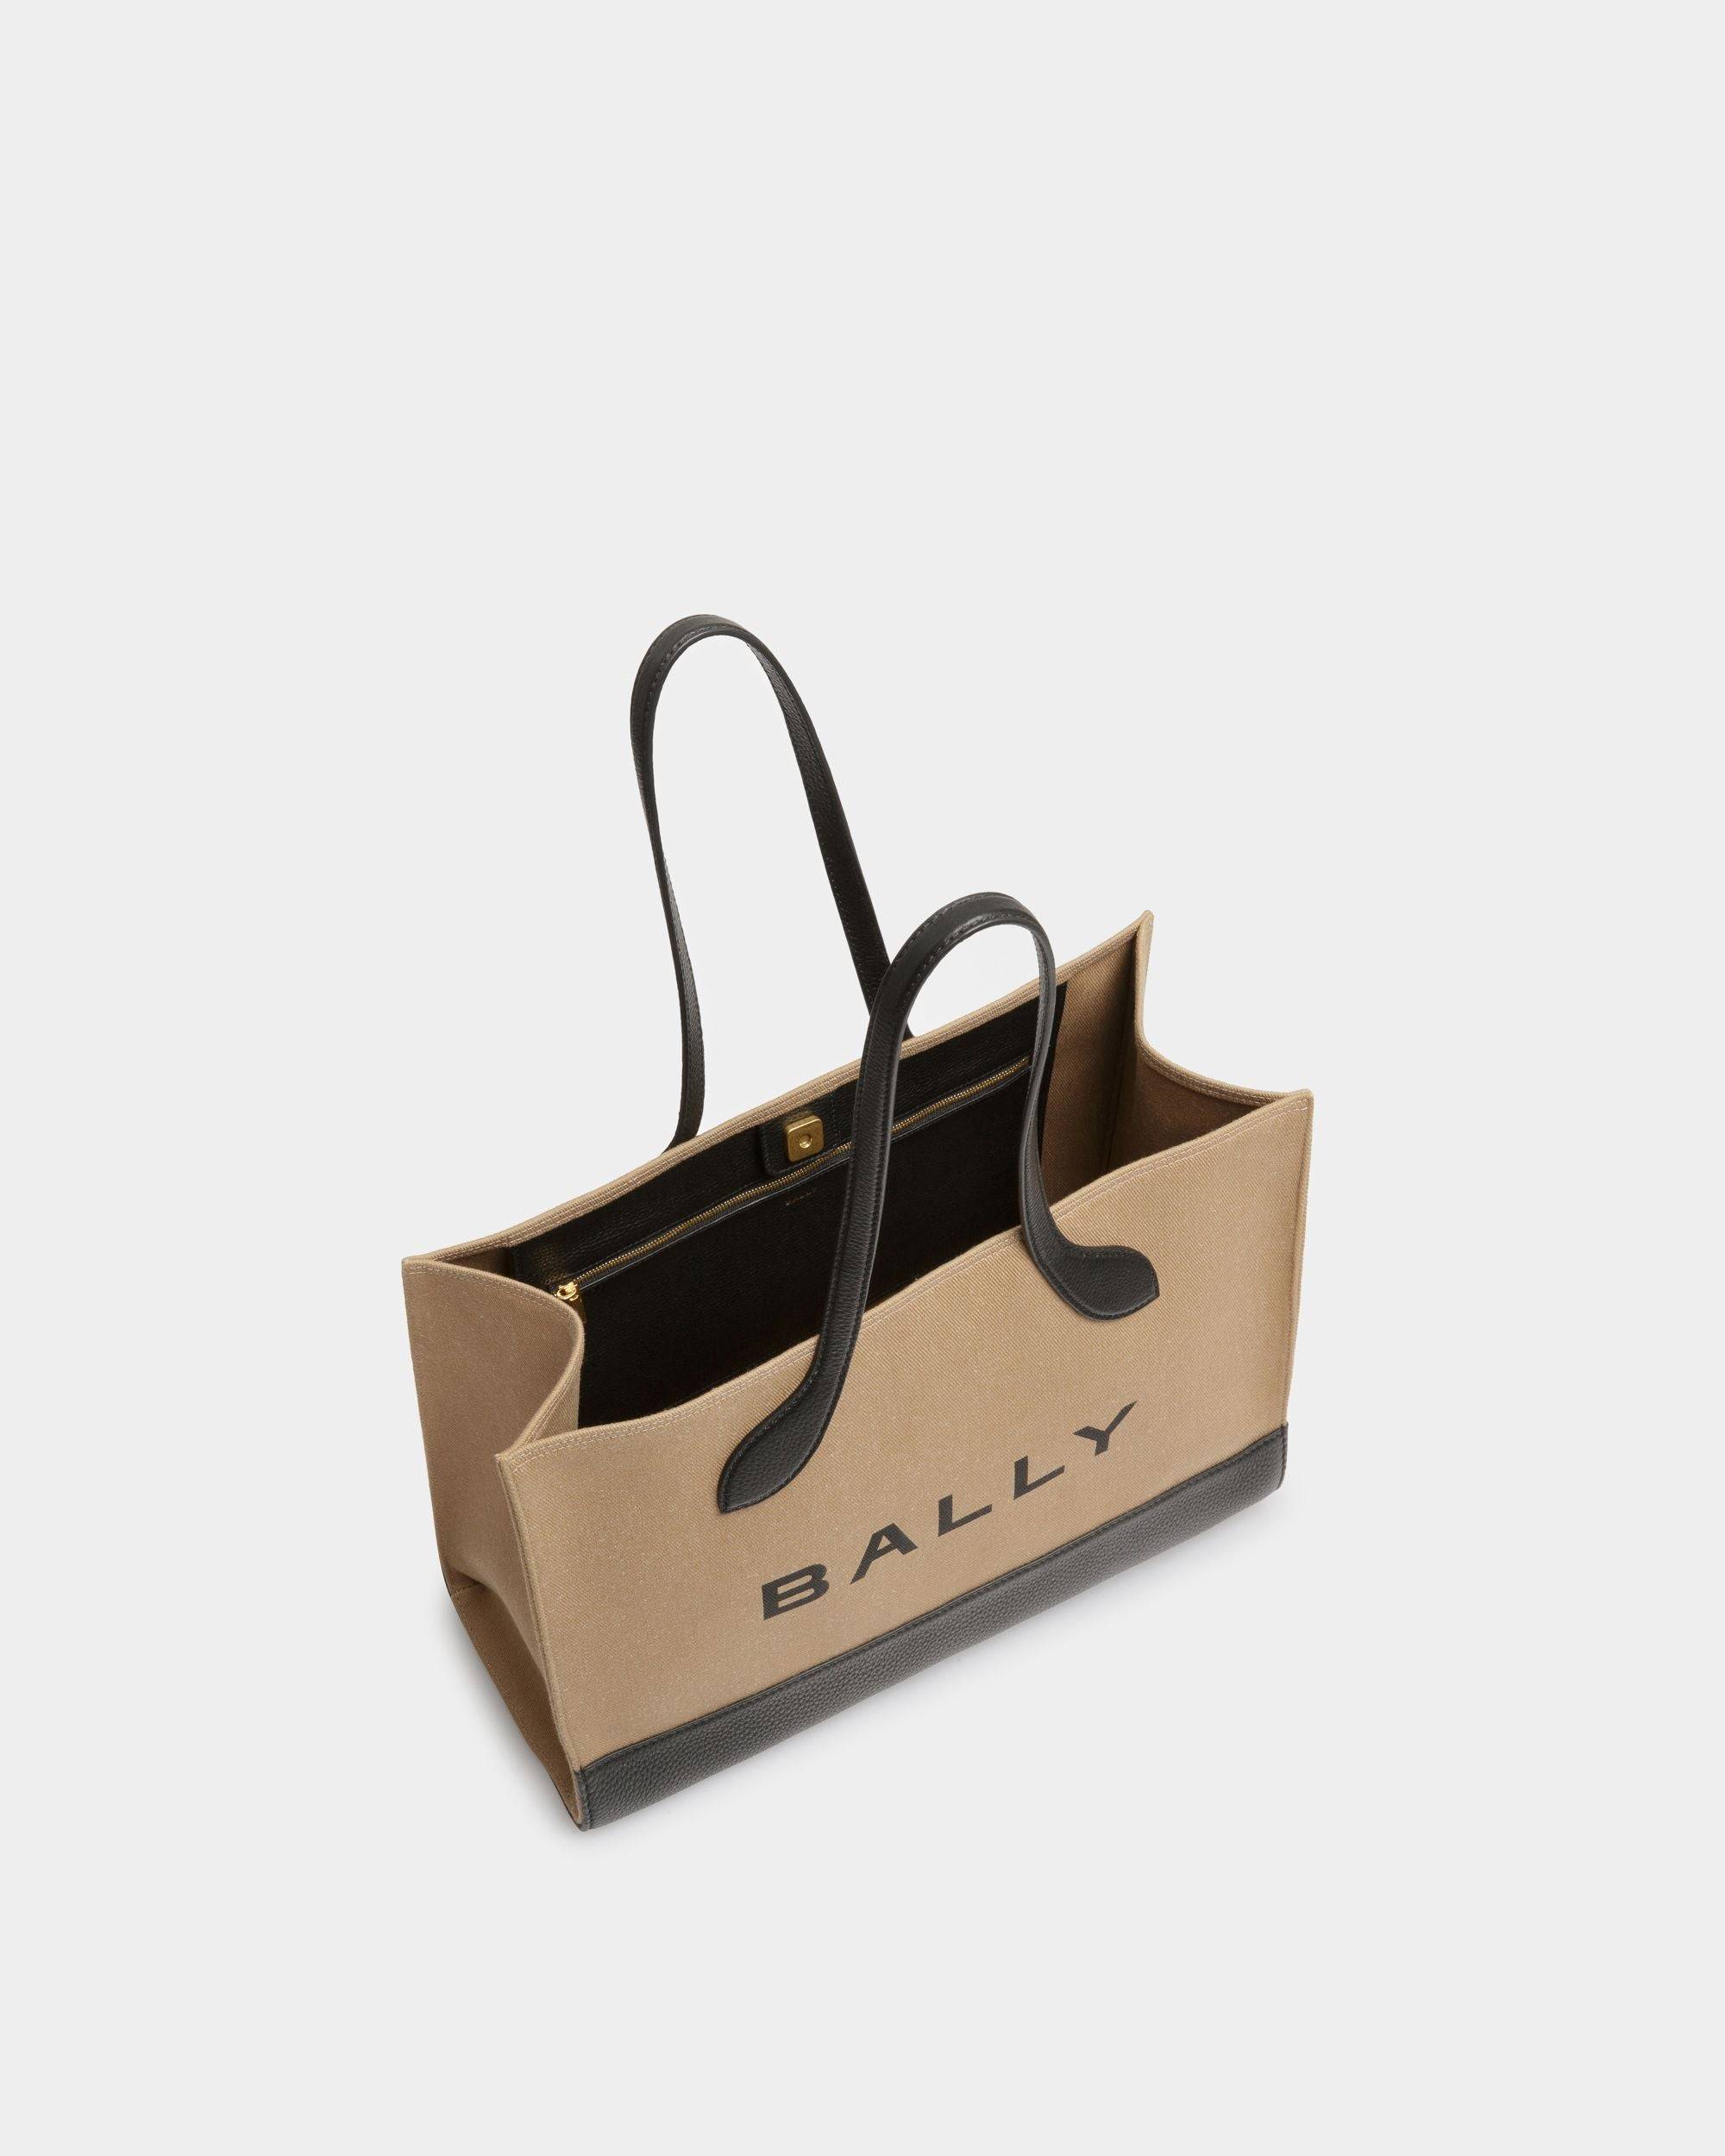 Keep On Ew | Women's Tote Bag | Sand And Black Fabric | Bally | Still Life Open / Inside